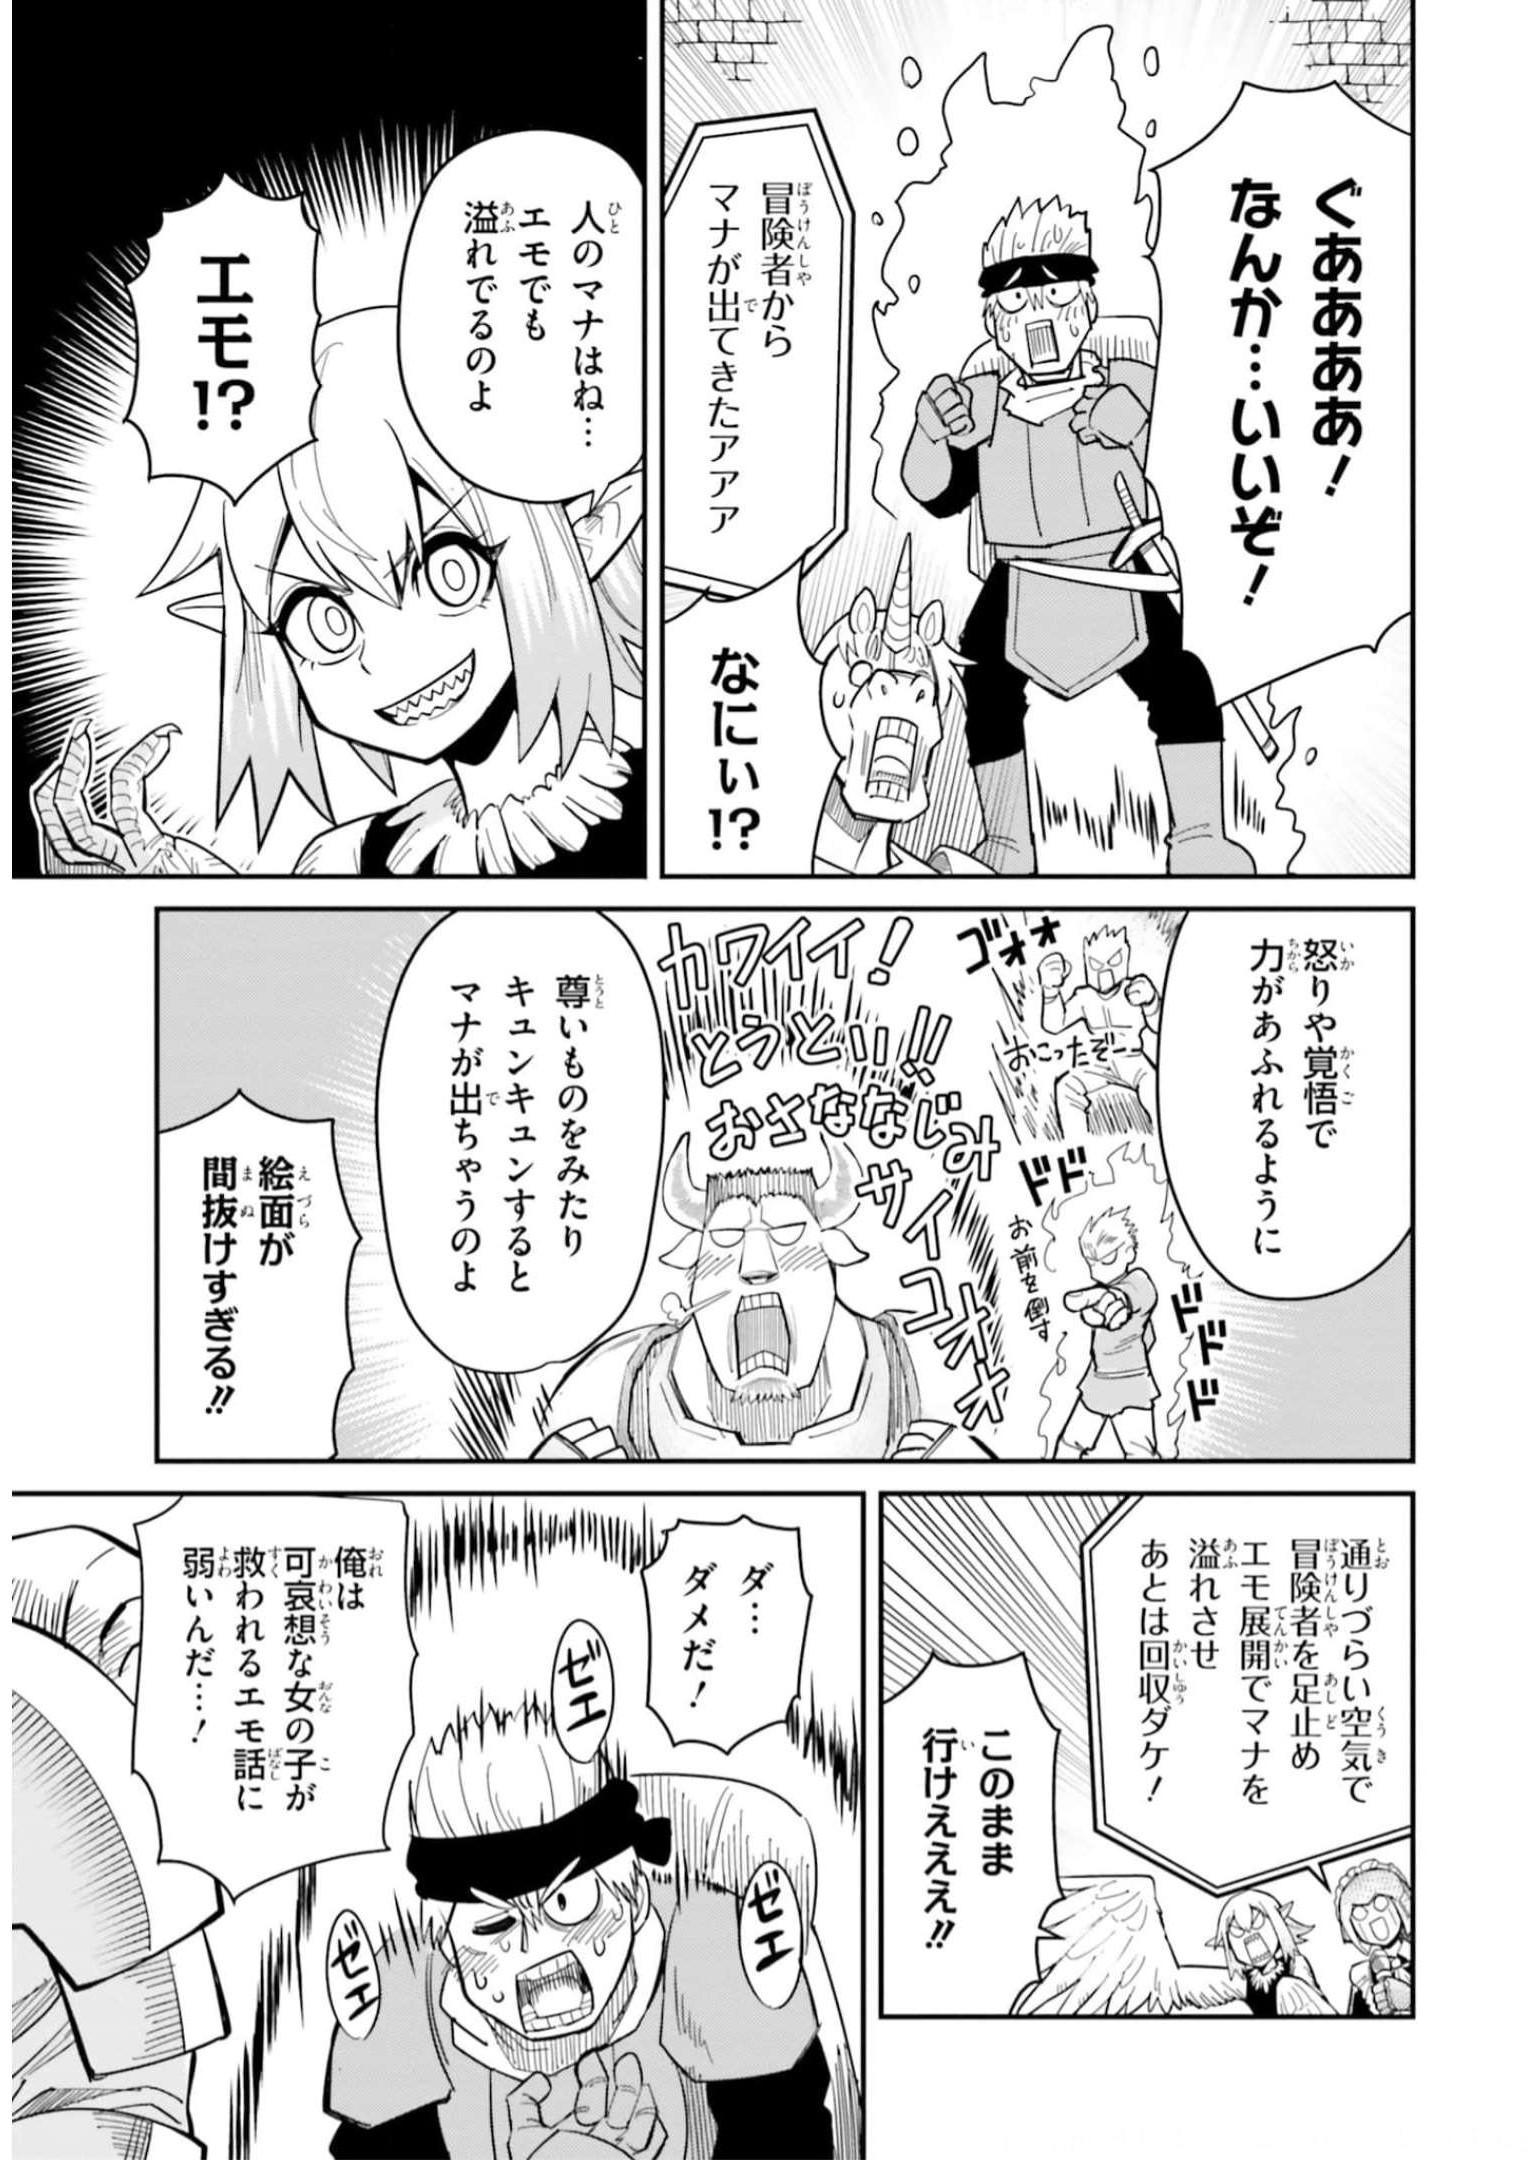 Dungeon Friends Forever Dungeon's Childhood Friend ダンジョンの幼なじみ 第20話 - Page 15